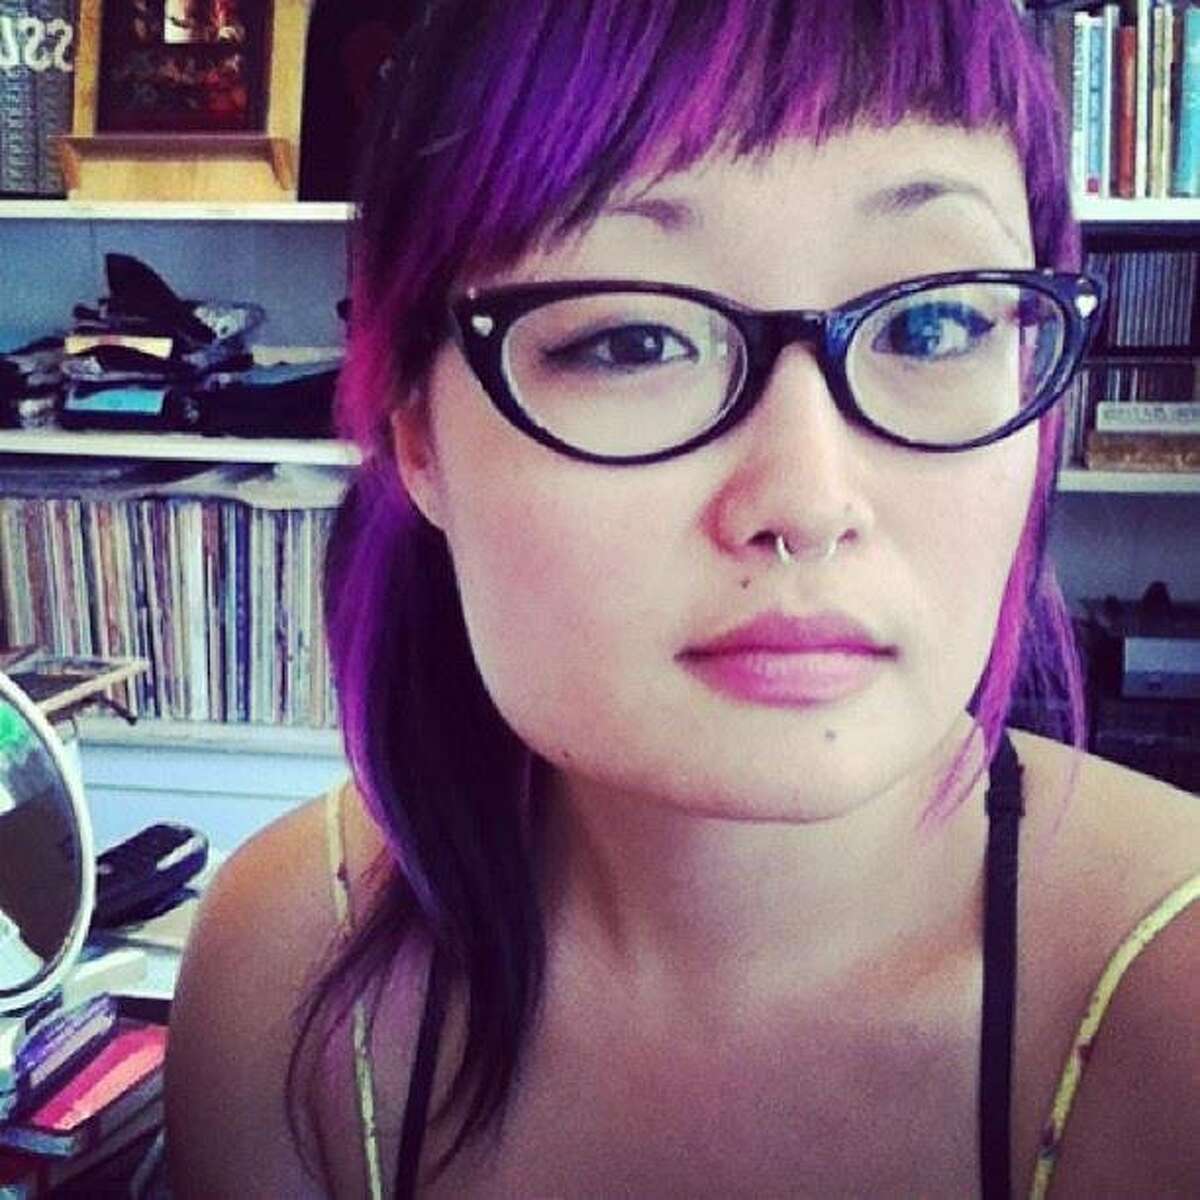 Kiyomi Tanouye, 31, was one of at least 36 people who died in Friday night�s fire at an Oakland warehouse known as the Ghost Ship. She was a music manager at Shazam. Photo: Facebook